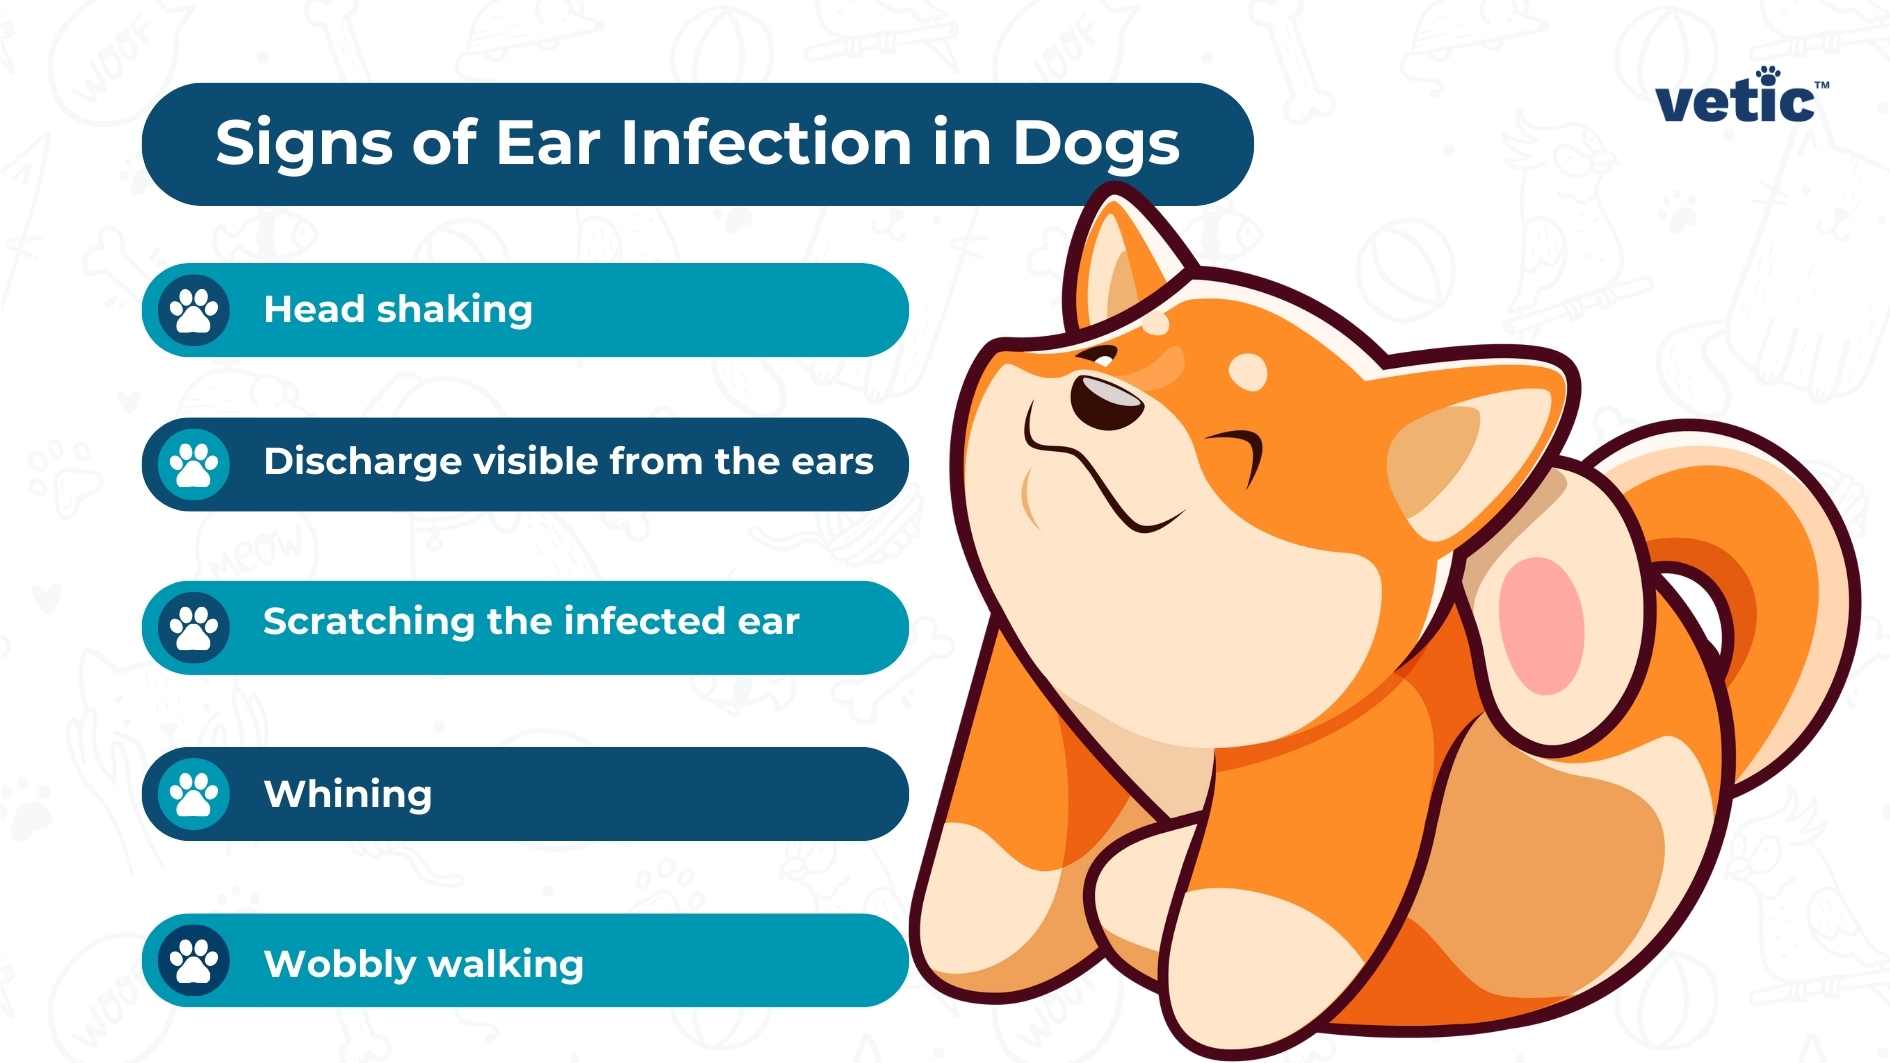 Infographic image by Vetic on the signs of ear infection in dogs, including head shaking, visible ear discharge, scratching the infected ear, whining, and wobbly walking.